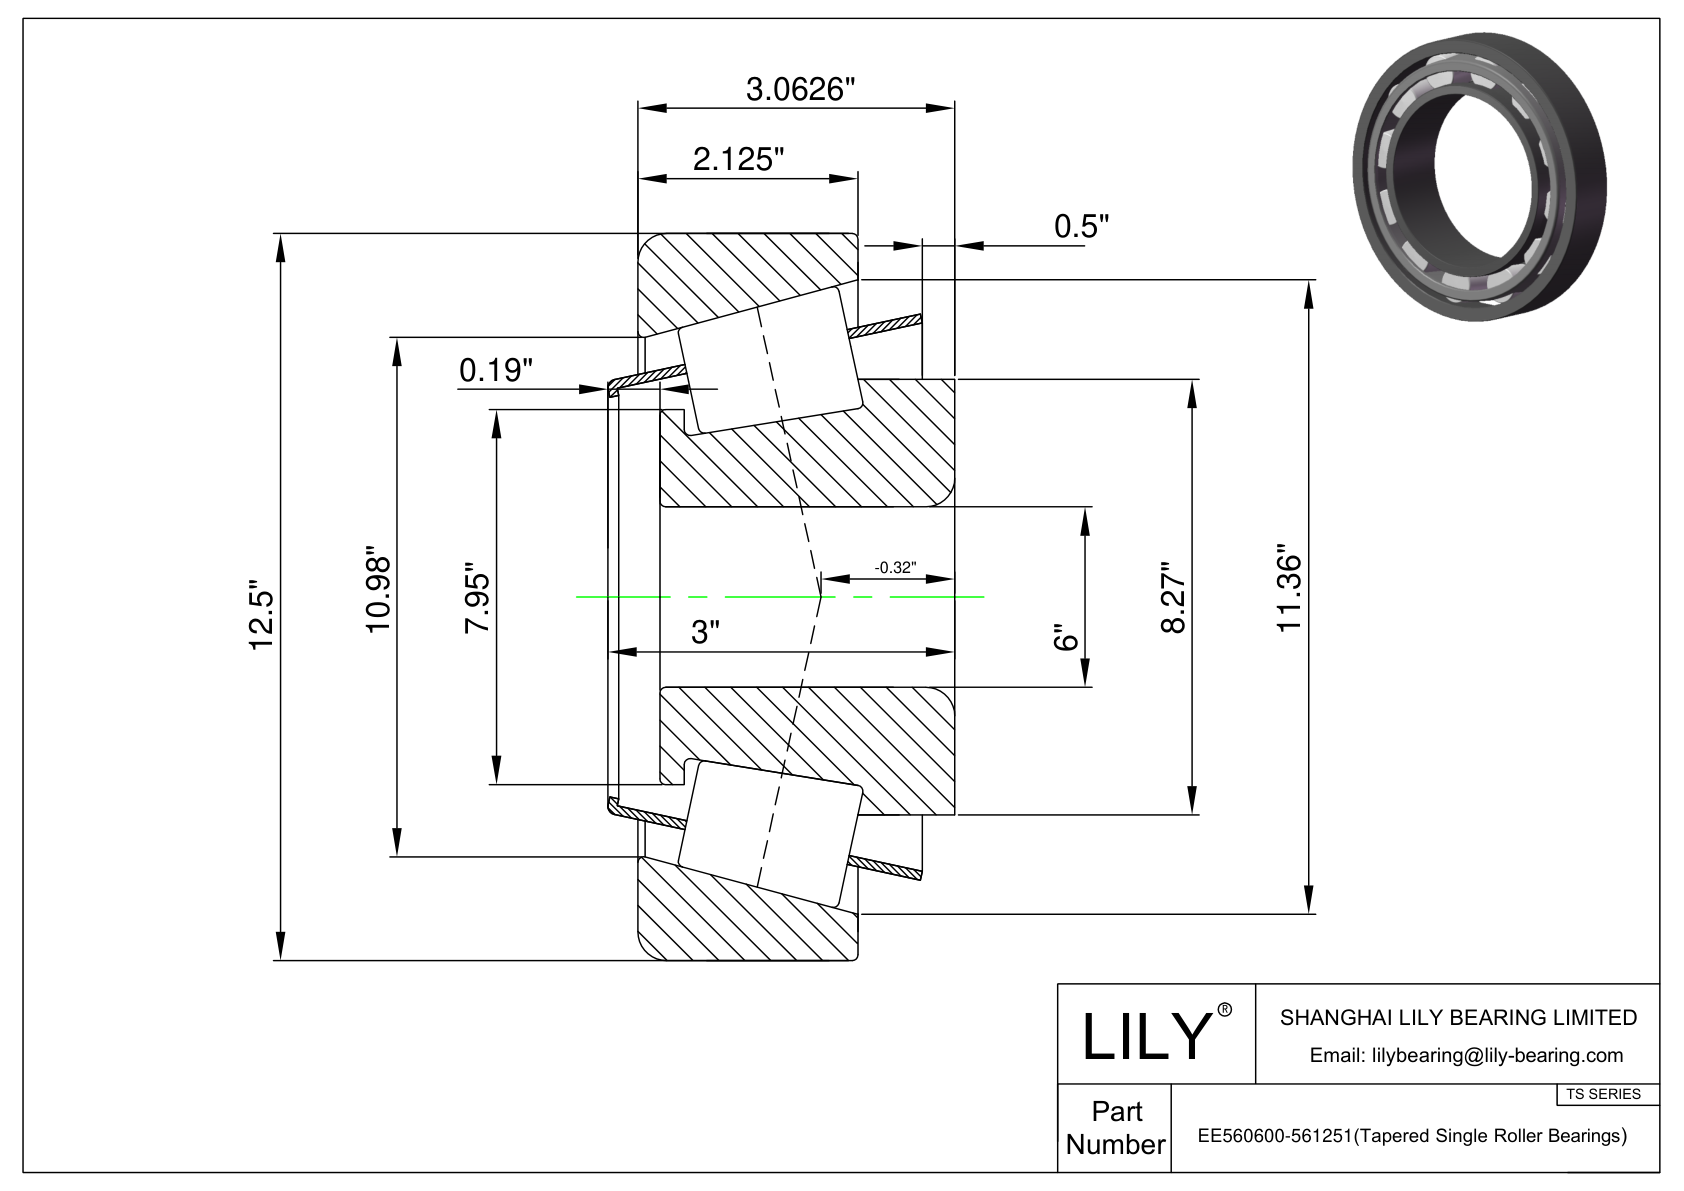 EE560600-561251 TS (Tapered Single Roller Bearings) (Imperial) cad drawing